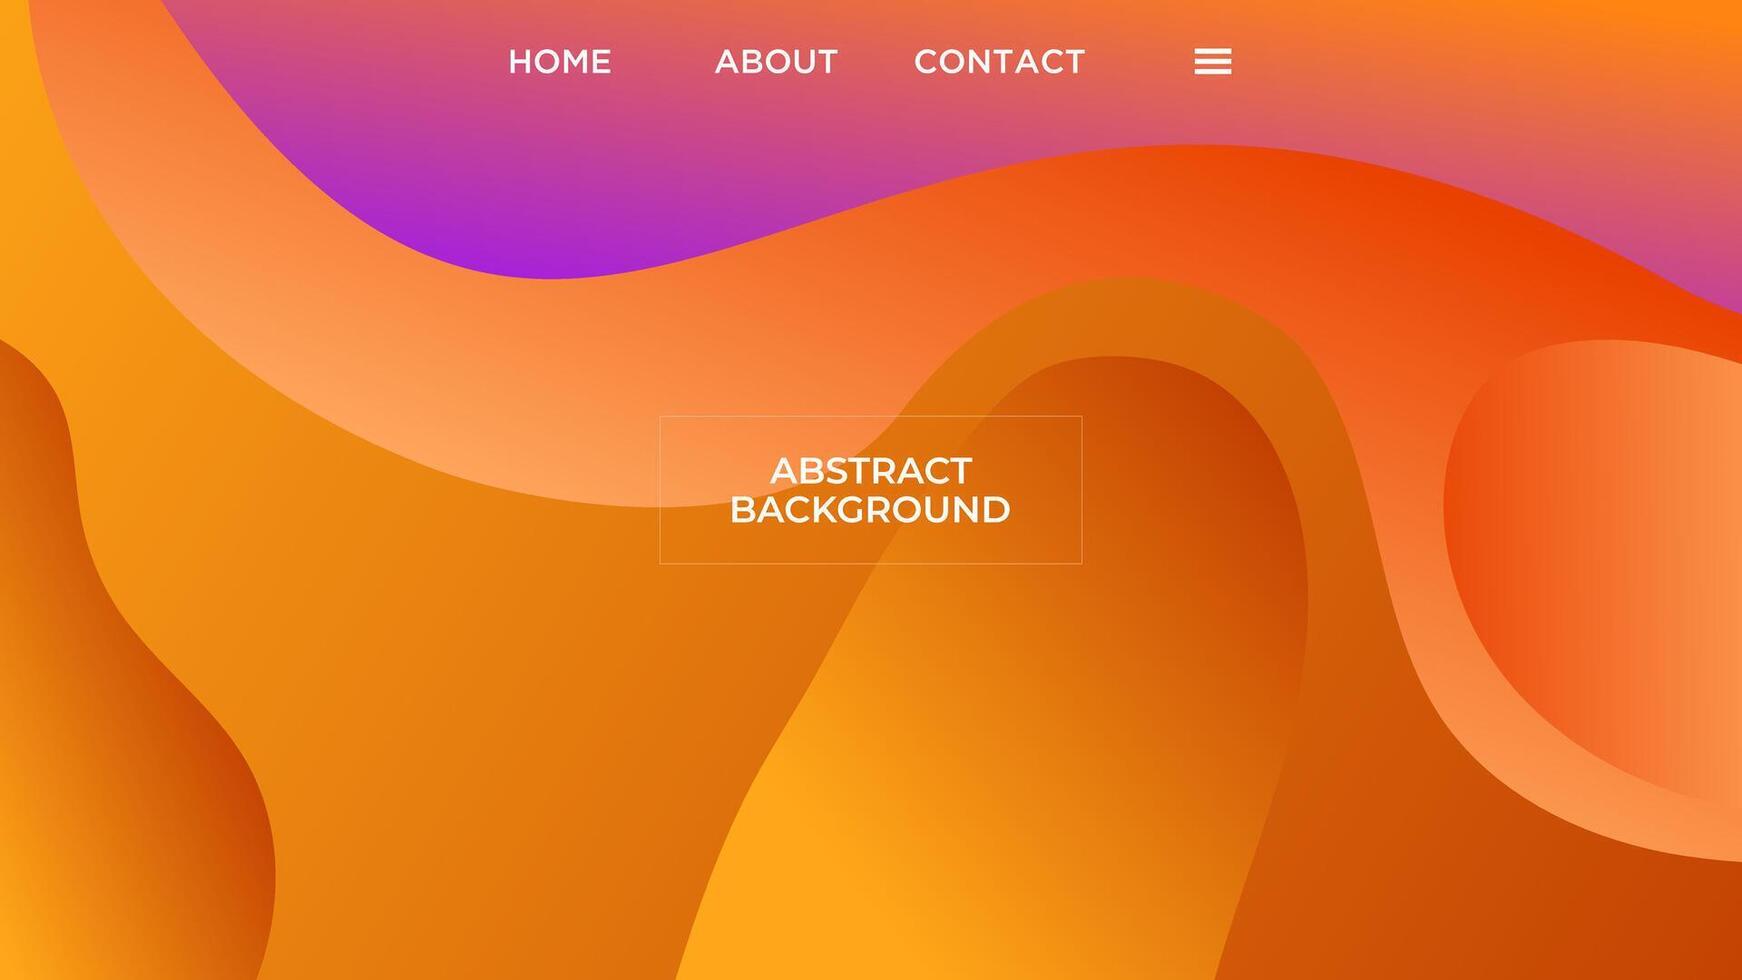 ABSTRACT ORANGE GRADIENT BACKGROUND SMOOTH LIQUID COLORFUL BLURRED DESIGN WITH GEOMETRIC SHAPES. TEMPLATE GOOD FOR MODERN WEBSITE, WALLPAPER, COVER DESIGN vector